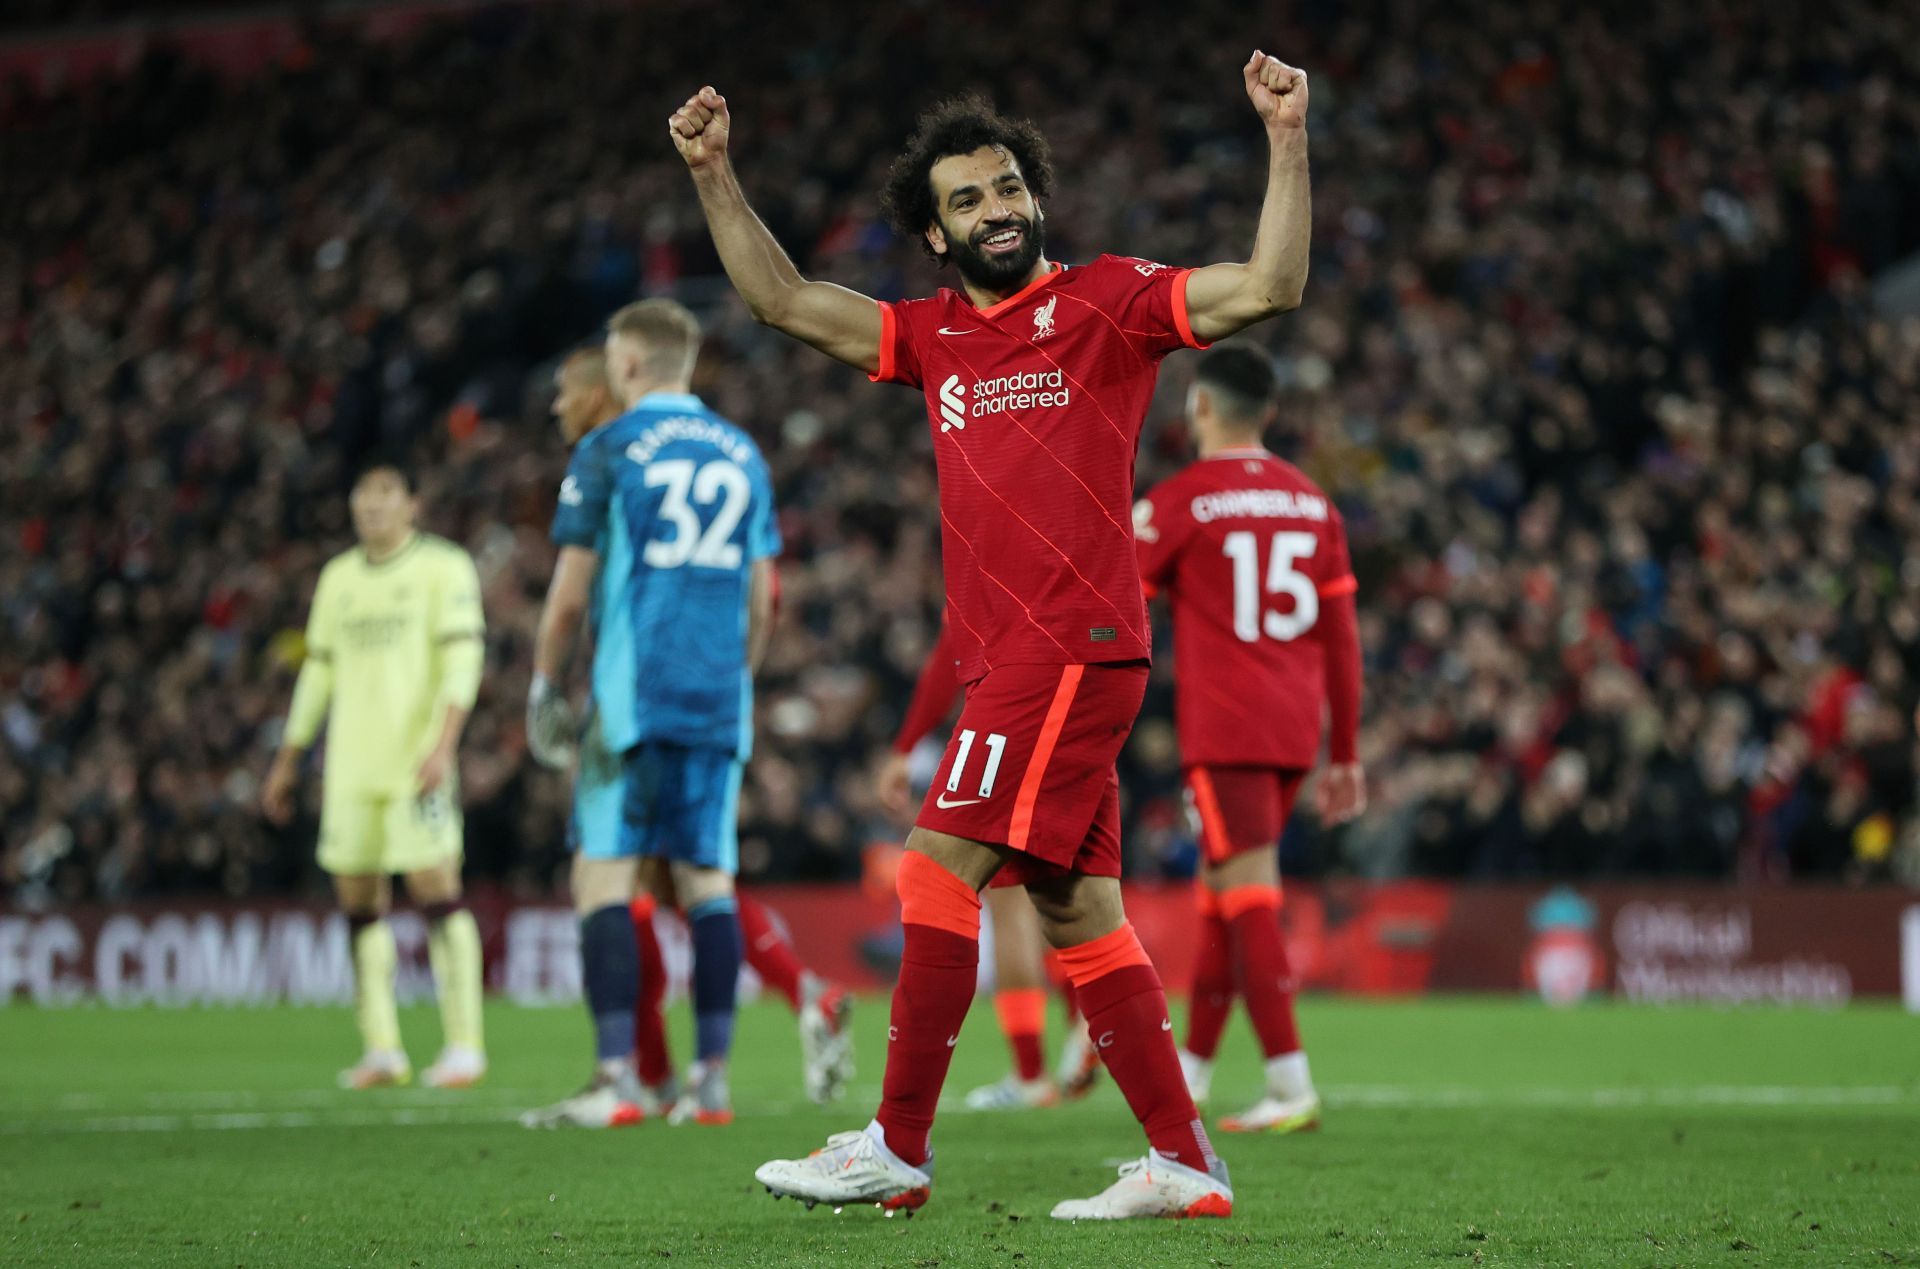 No one comes close to Mohamed Salah in the Premier League this season